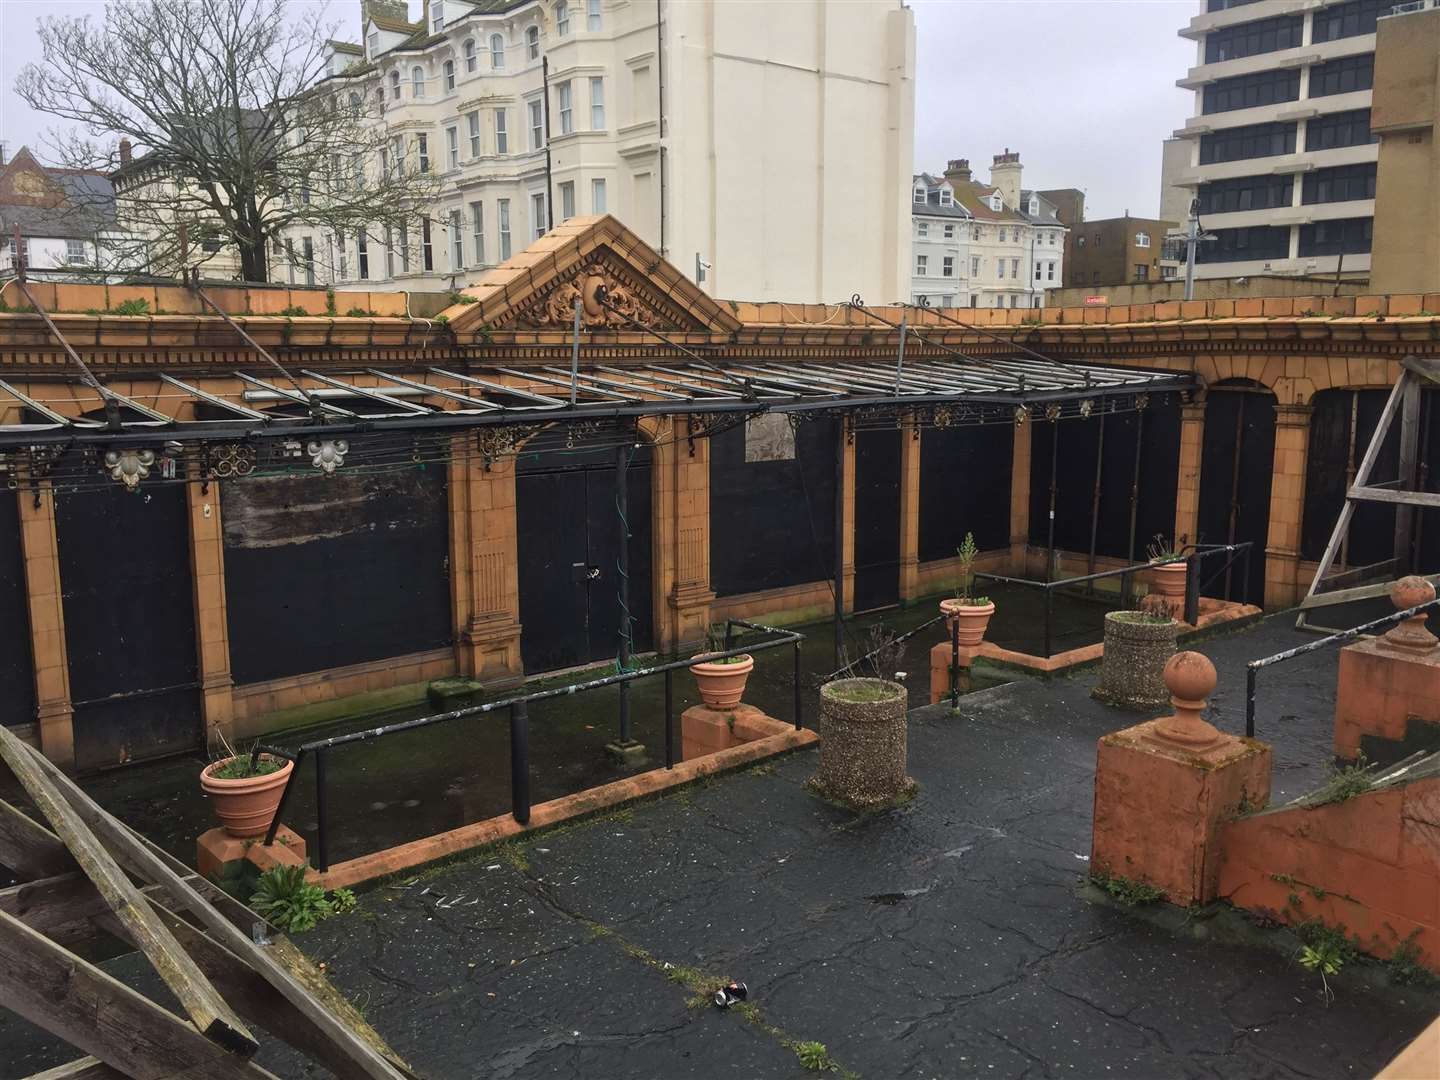 The Leas Pavilion has suffered from years of neglect